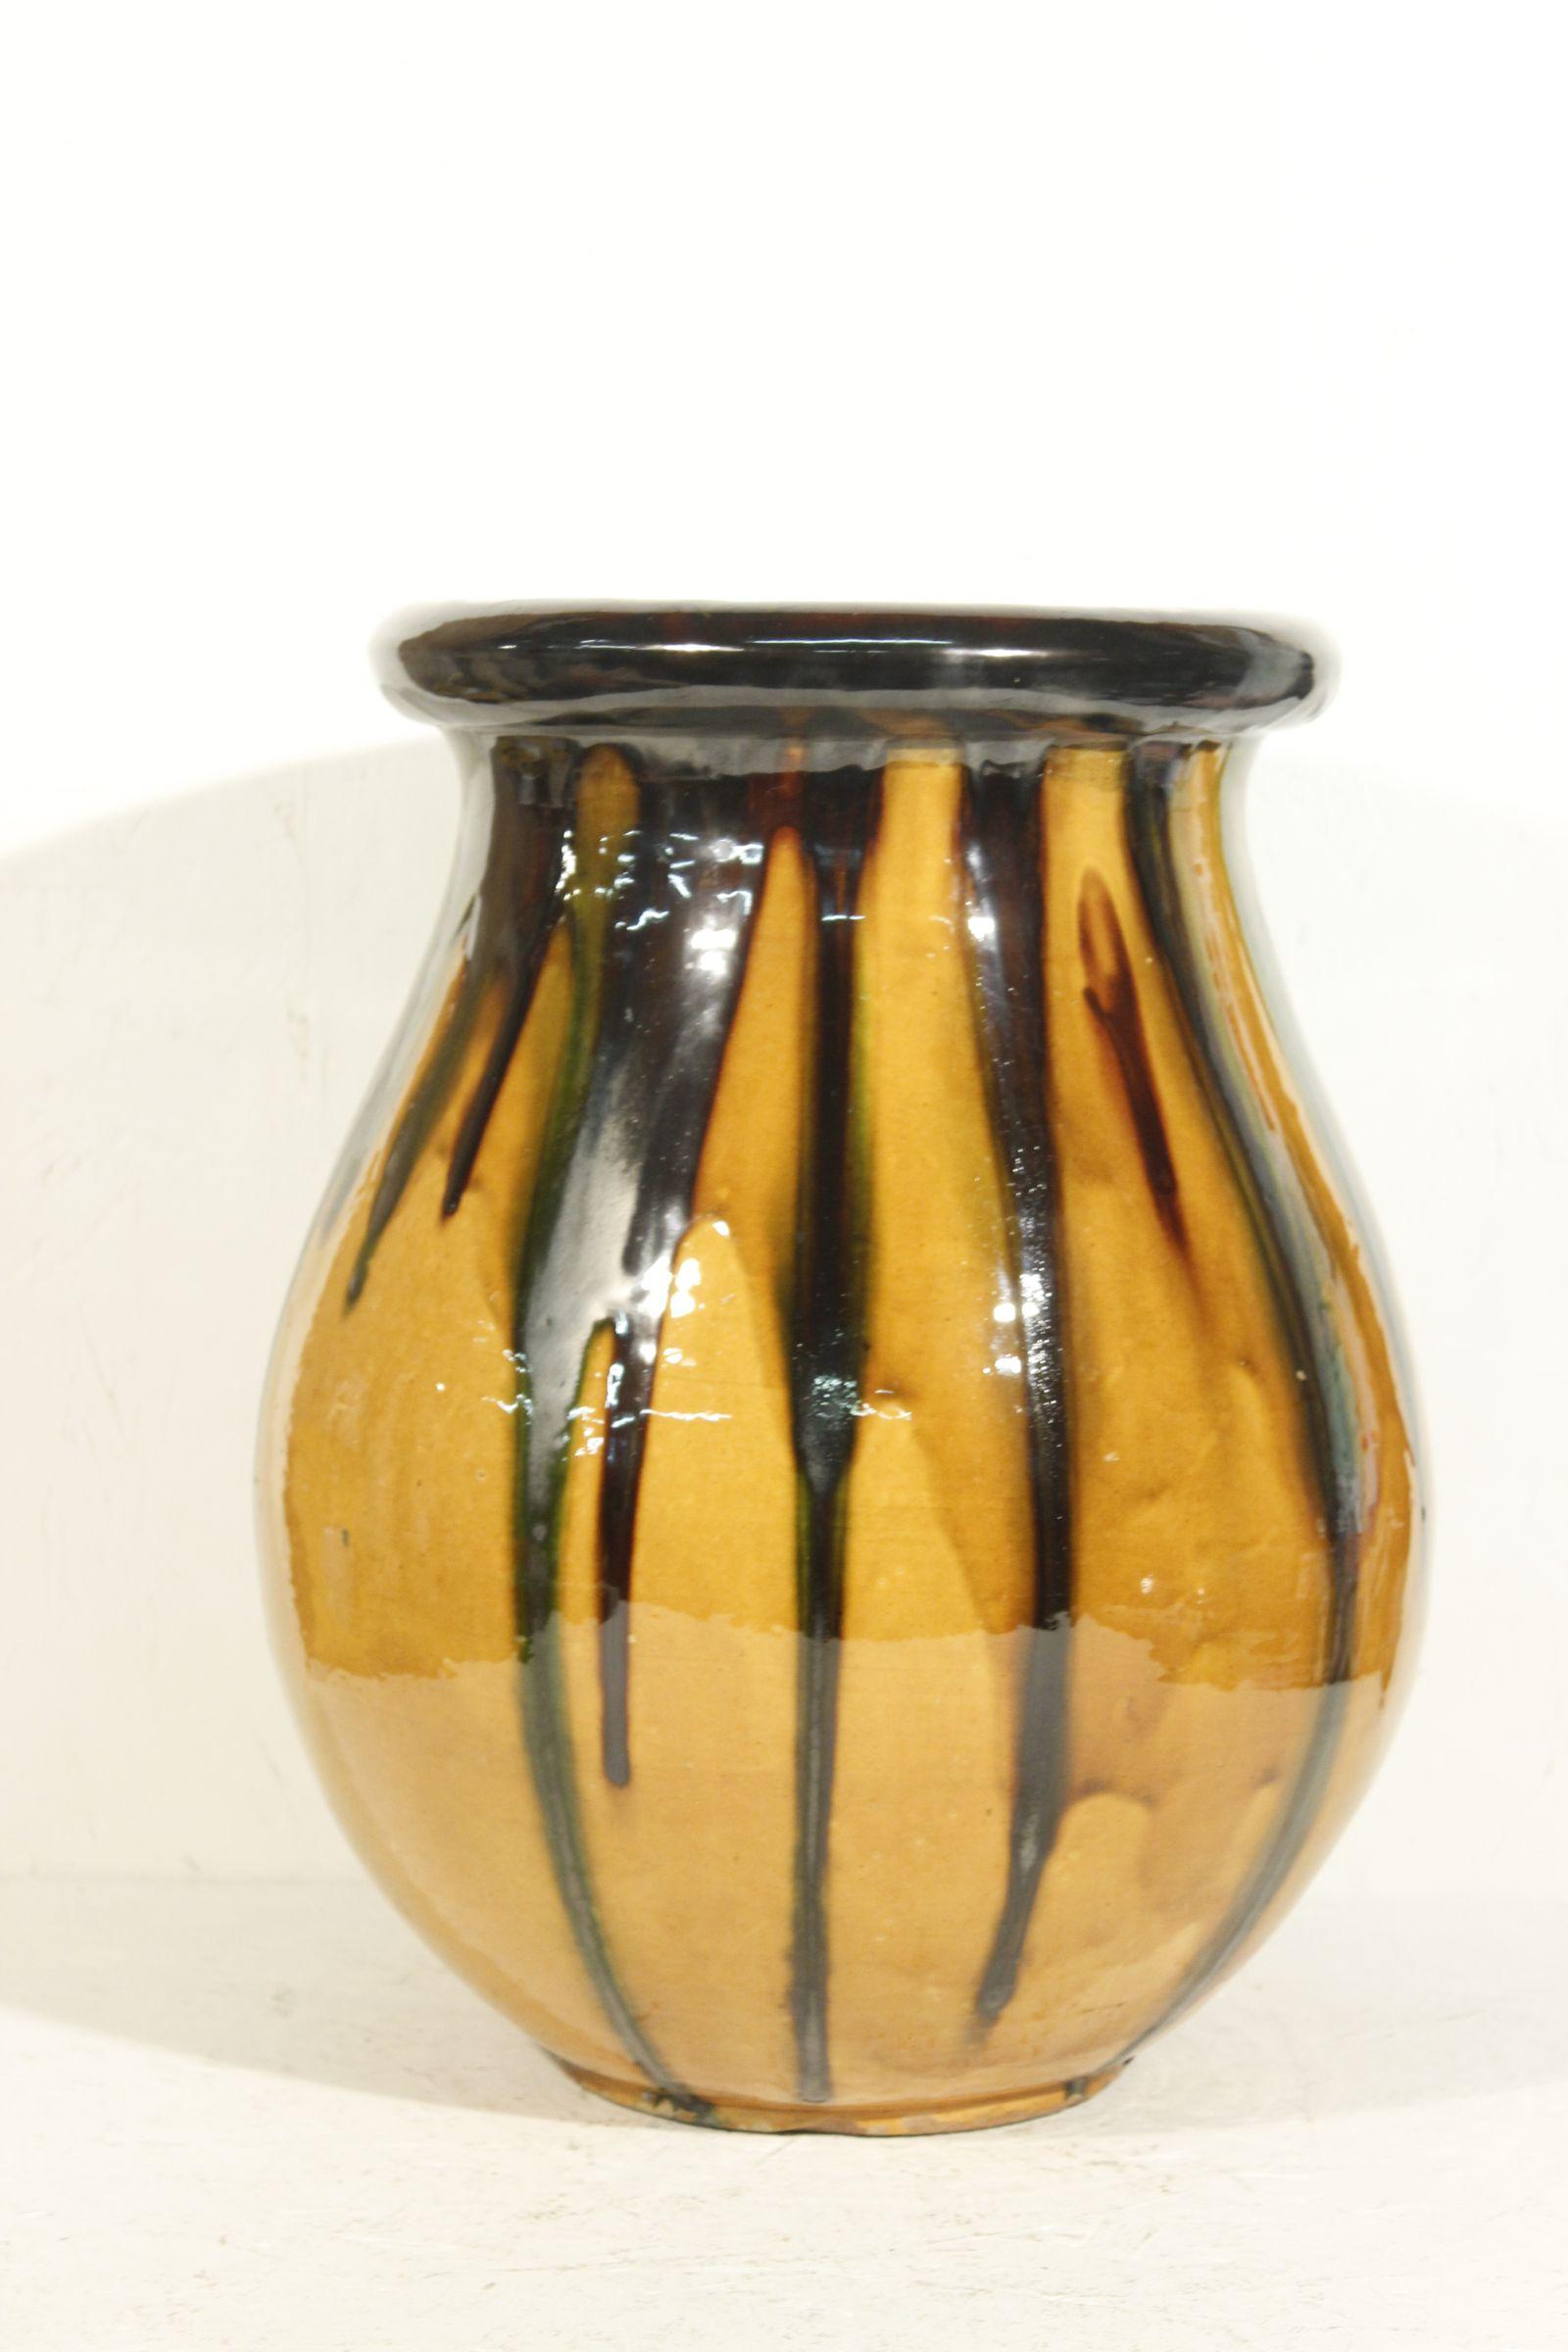 Traditional vintage French garden jar by the Biot manufactures, this piece was hand mounted using rope before being glazed with the popular yellow and green oxides often used in southern France. 

The piece dates back to the mid 20th century, it is